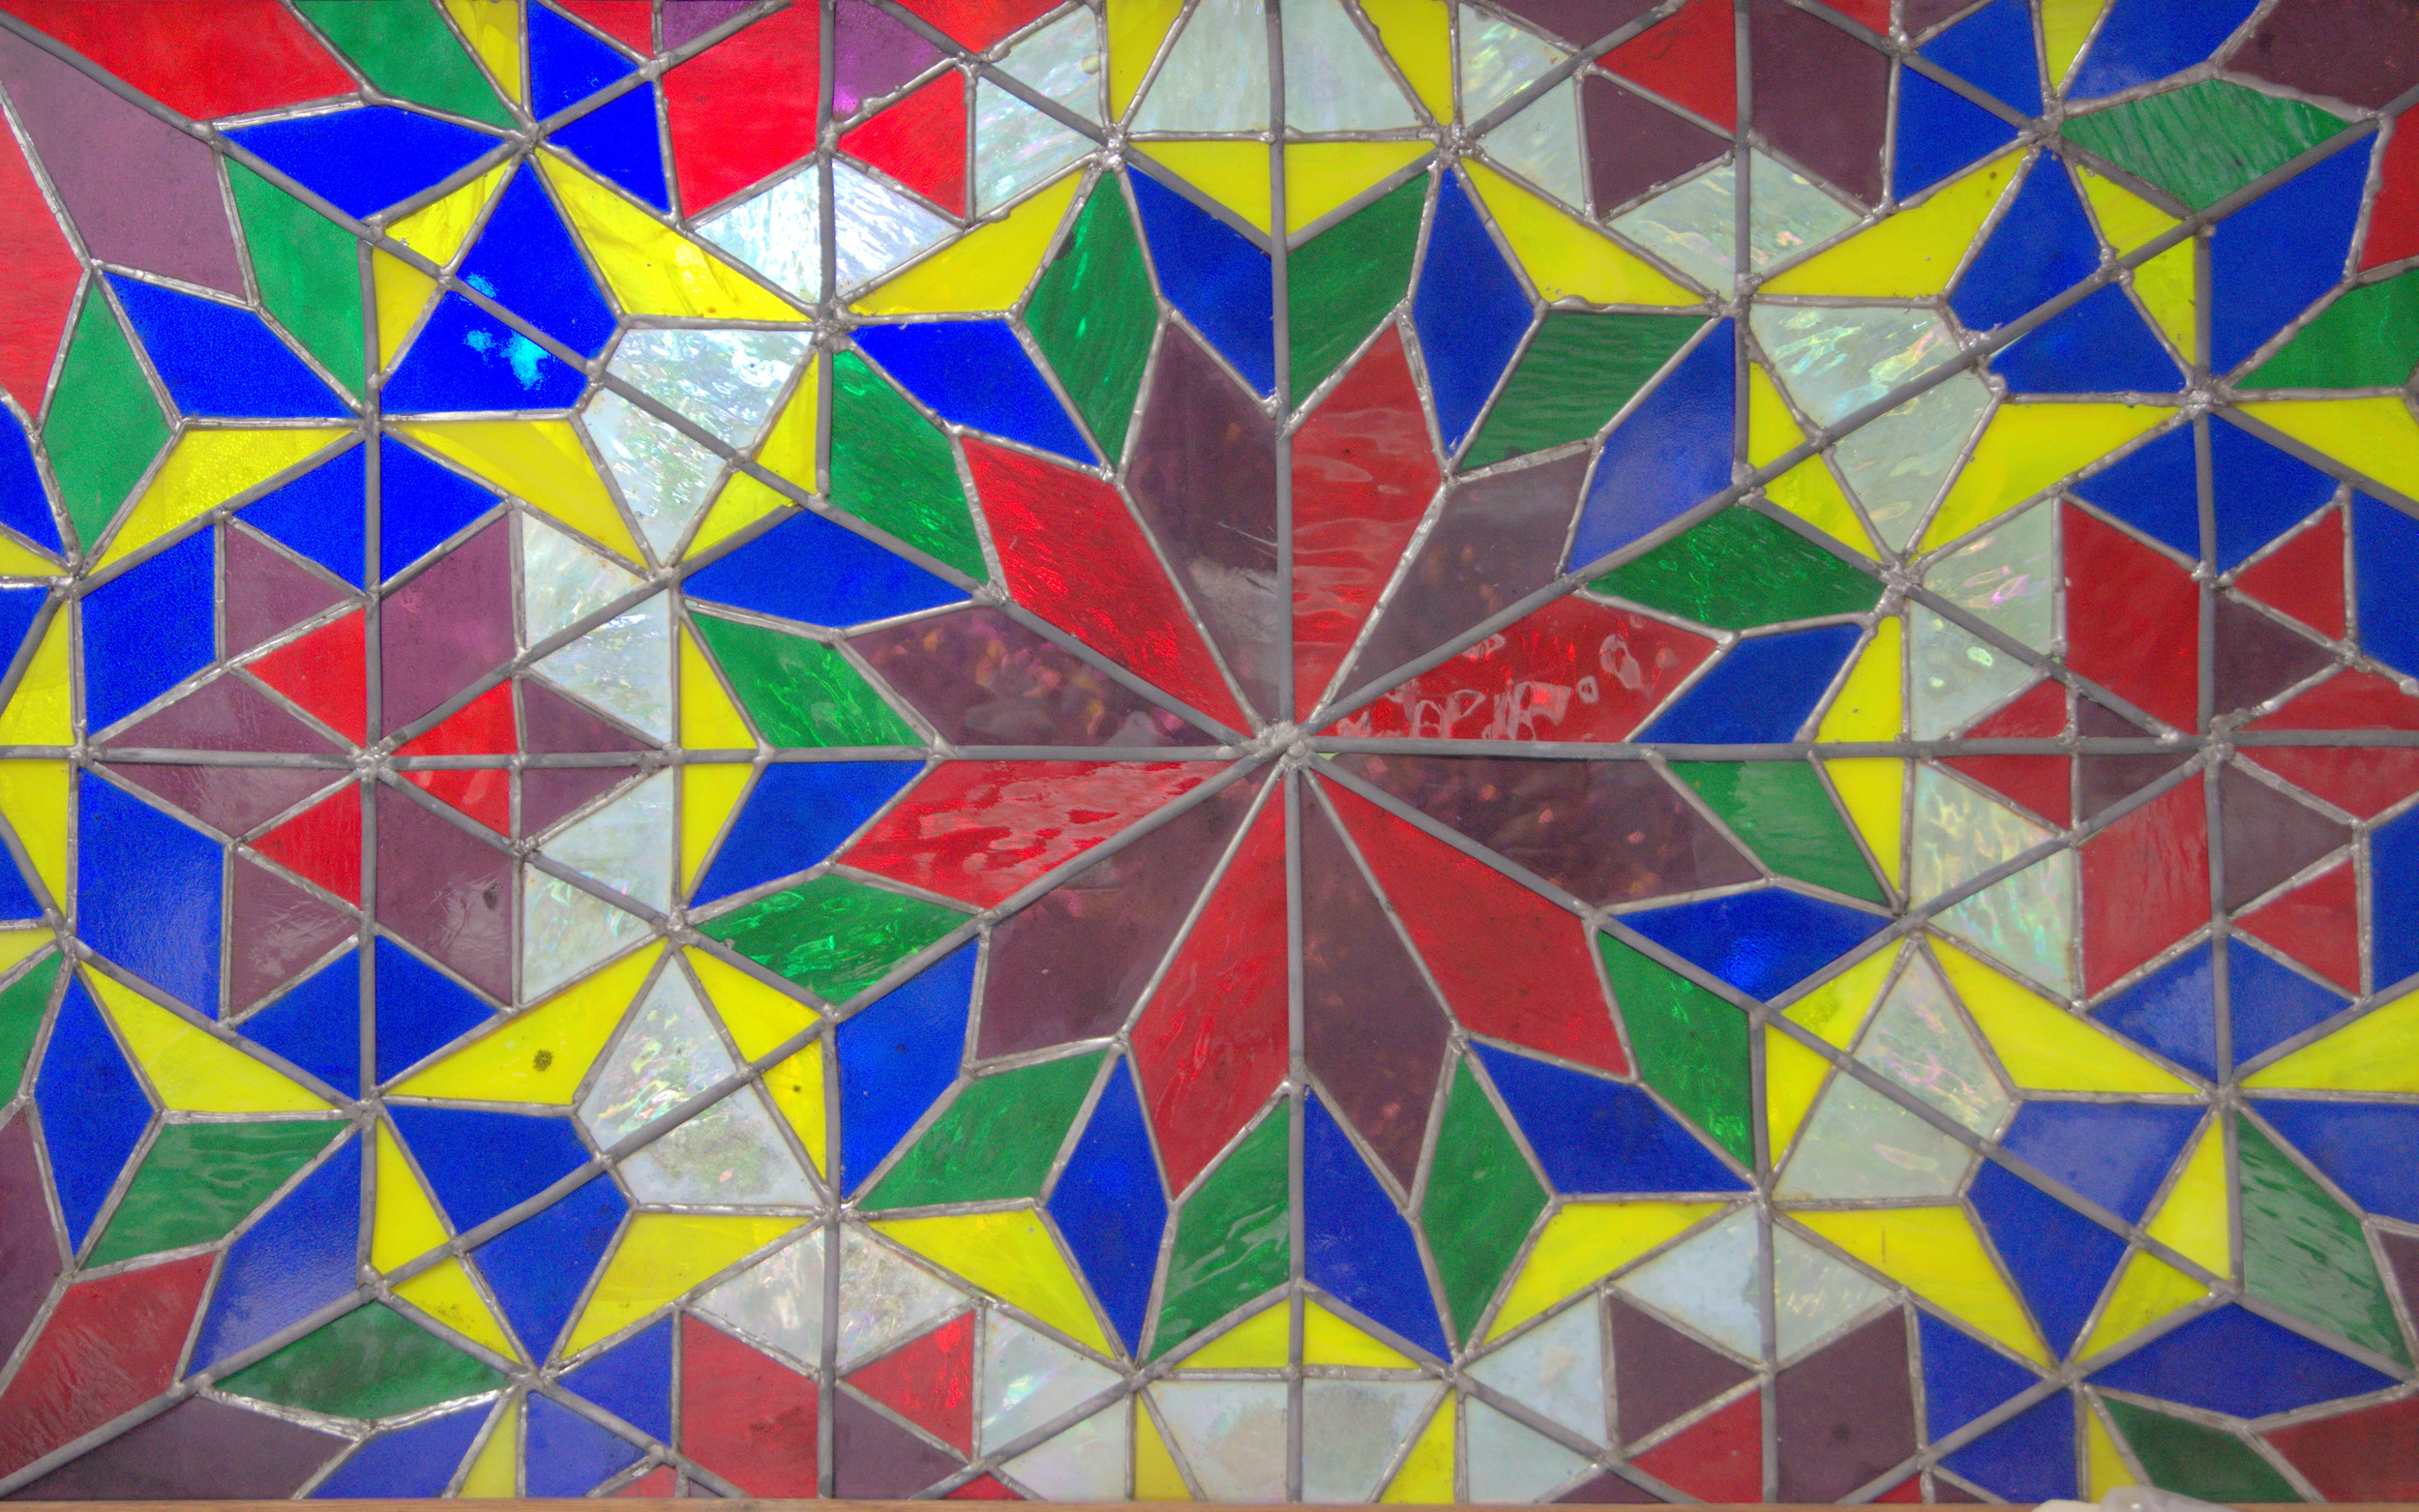  Stained glass, 1995. or so. 